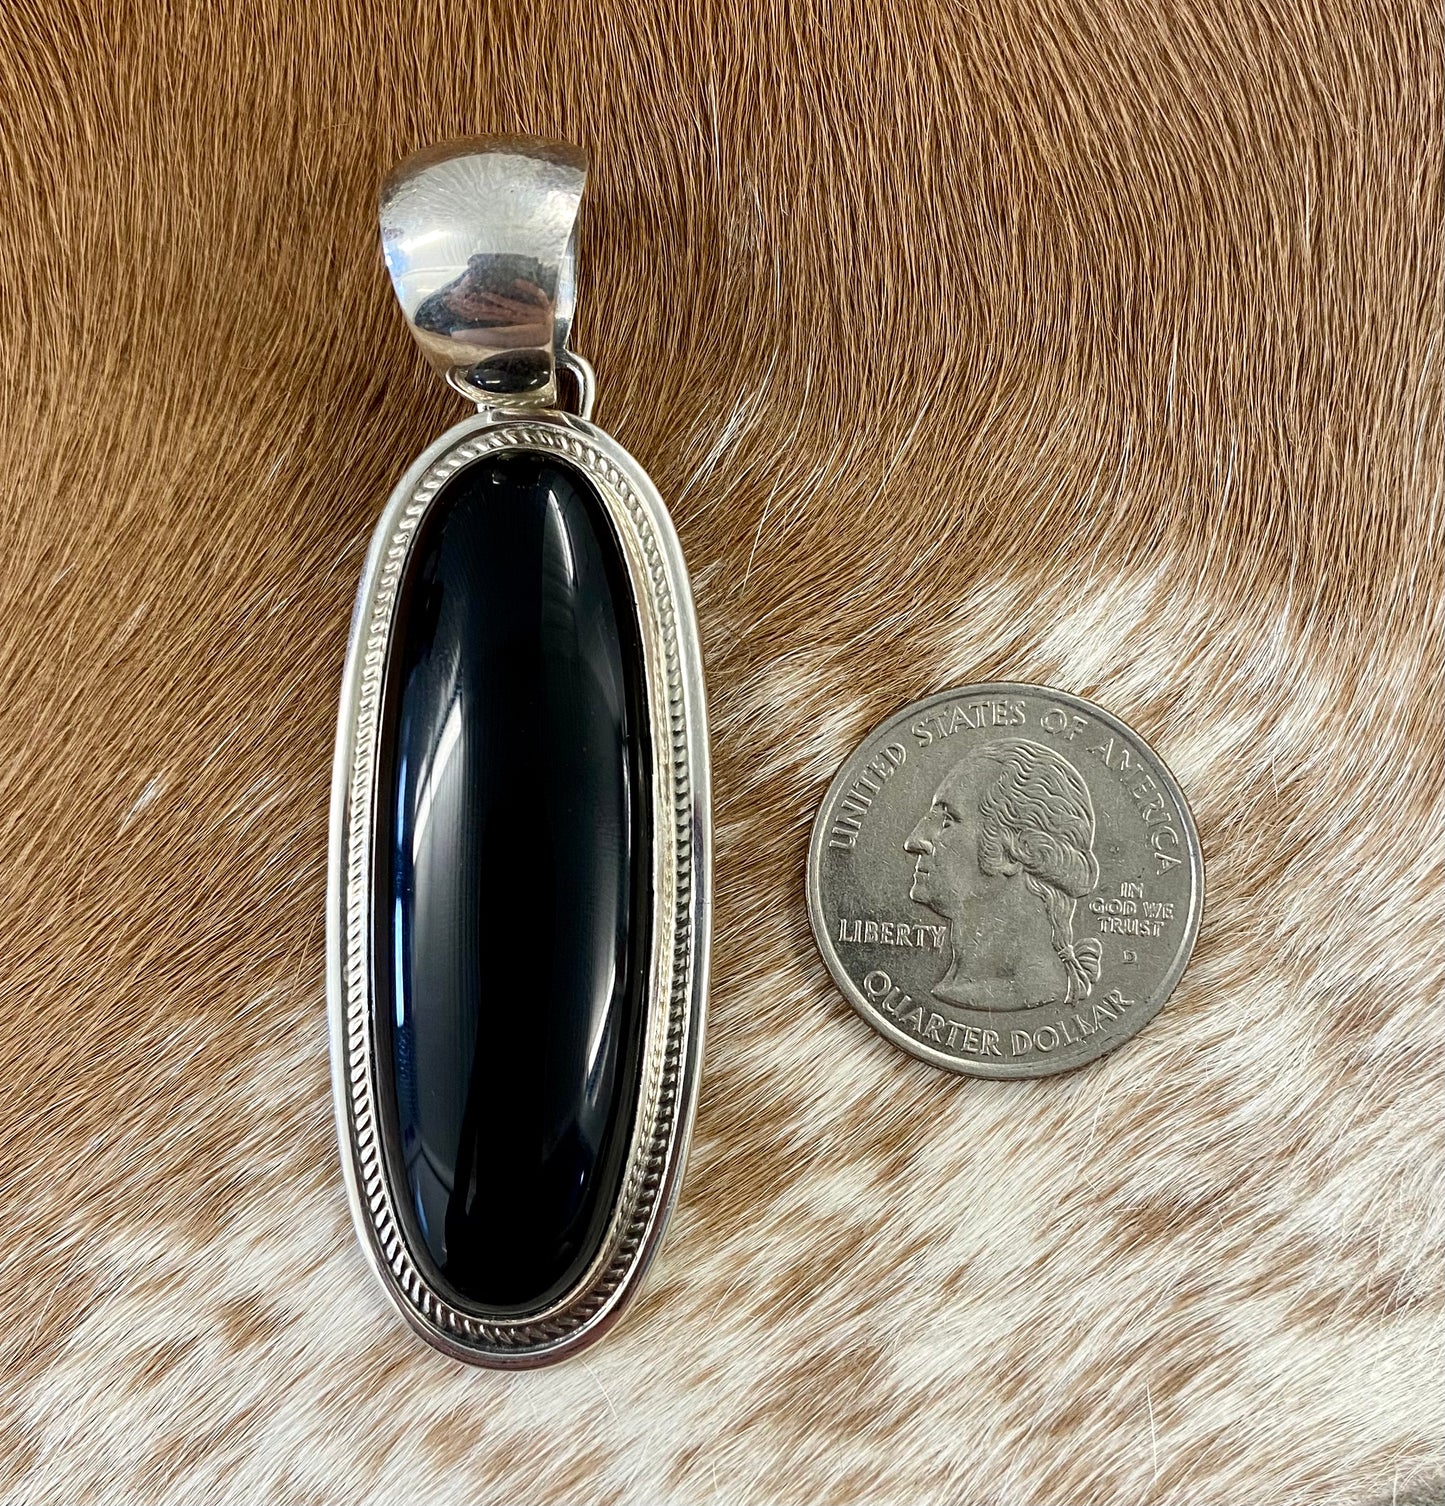 The perfect single-stone sterling silver Native American-made large black onyx pendant to add to any necklace. This piece will look gorgeous on a strand of Navajo pearls or a chain necklace. Stamped sterling and signed Harley Jake by Native artist silversmith Harley Jake on the back of the pendant.   Size: 2” inch length, bale 1/2” inch. 1" inch width   Signed: YES "Harley Jake"   Hallmark/ Artist: Harley Jake  Stone: Onyx